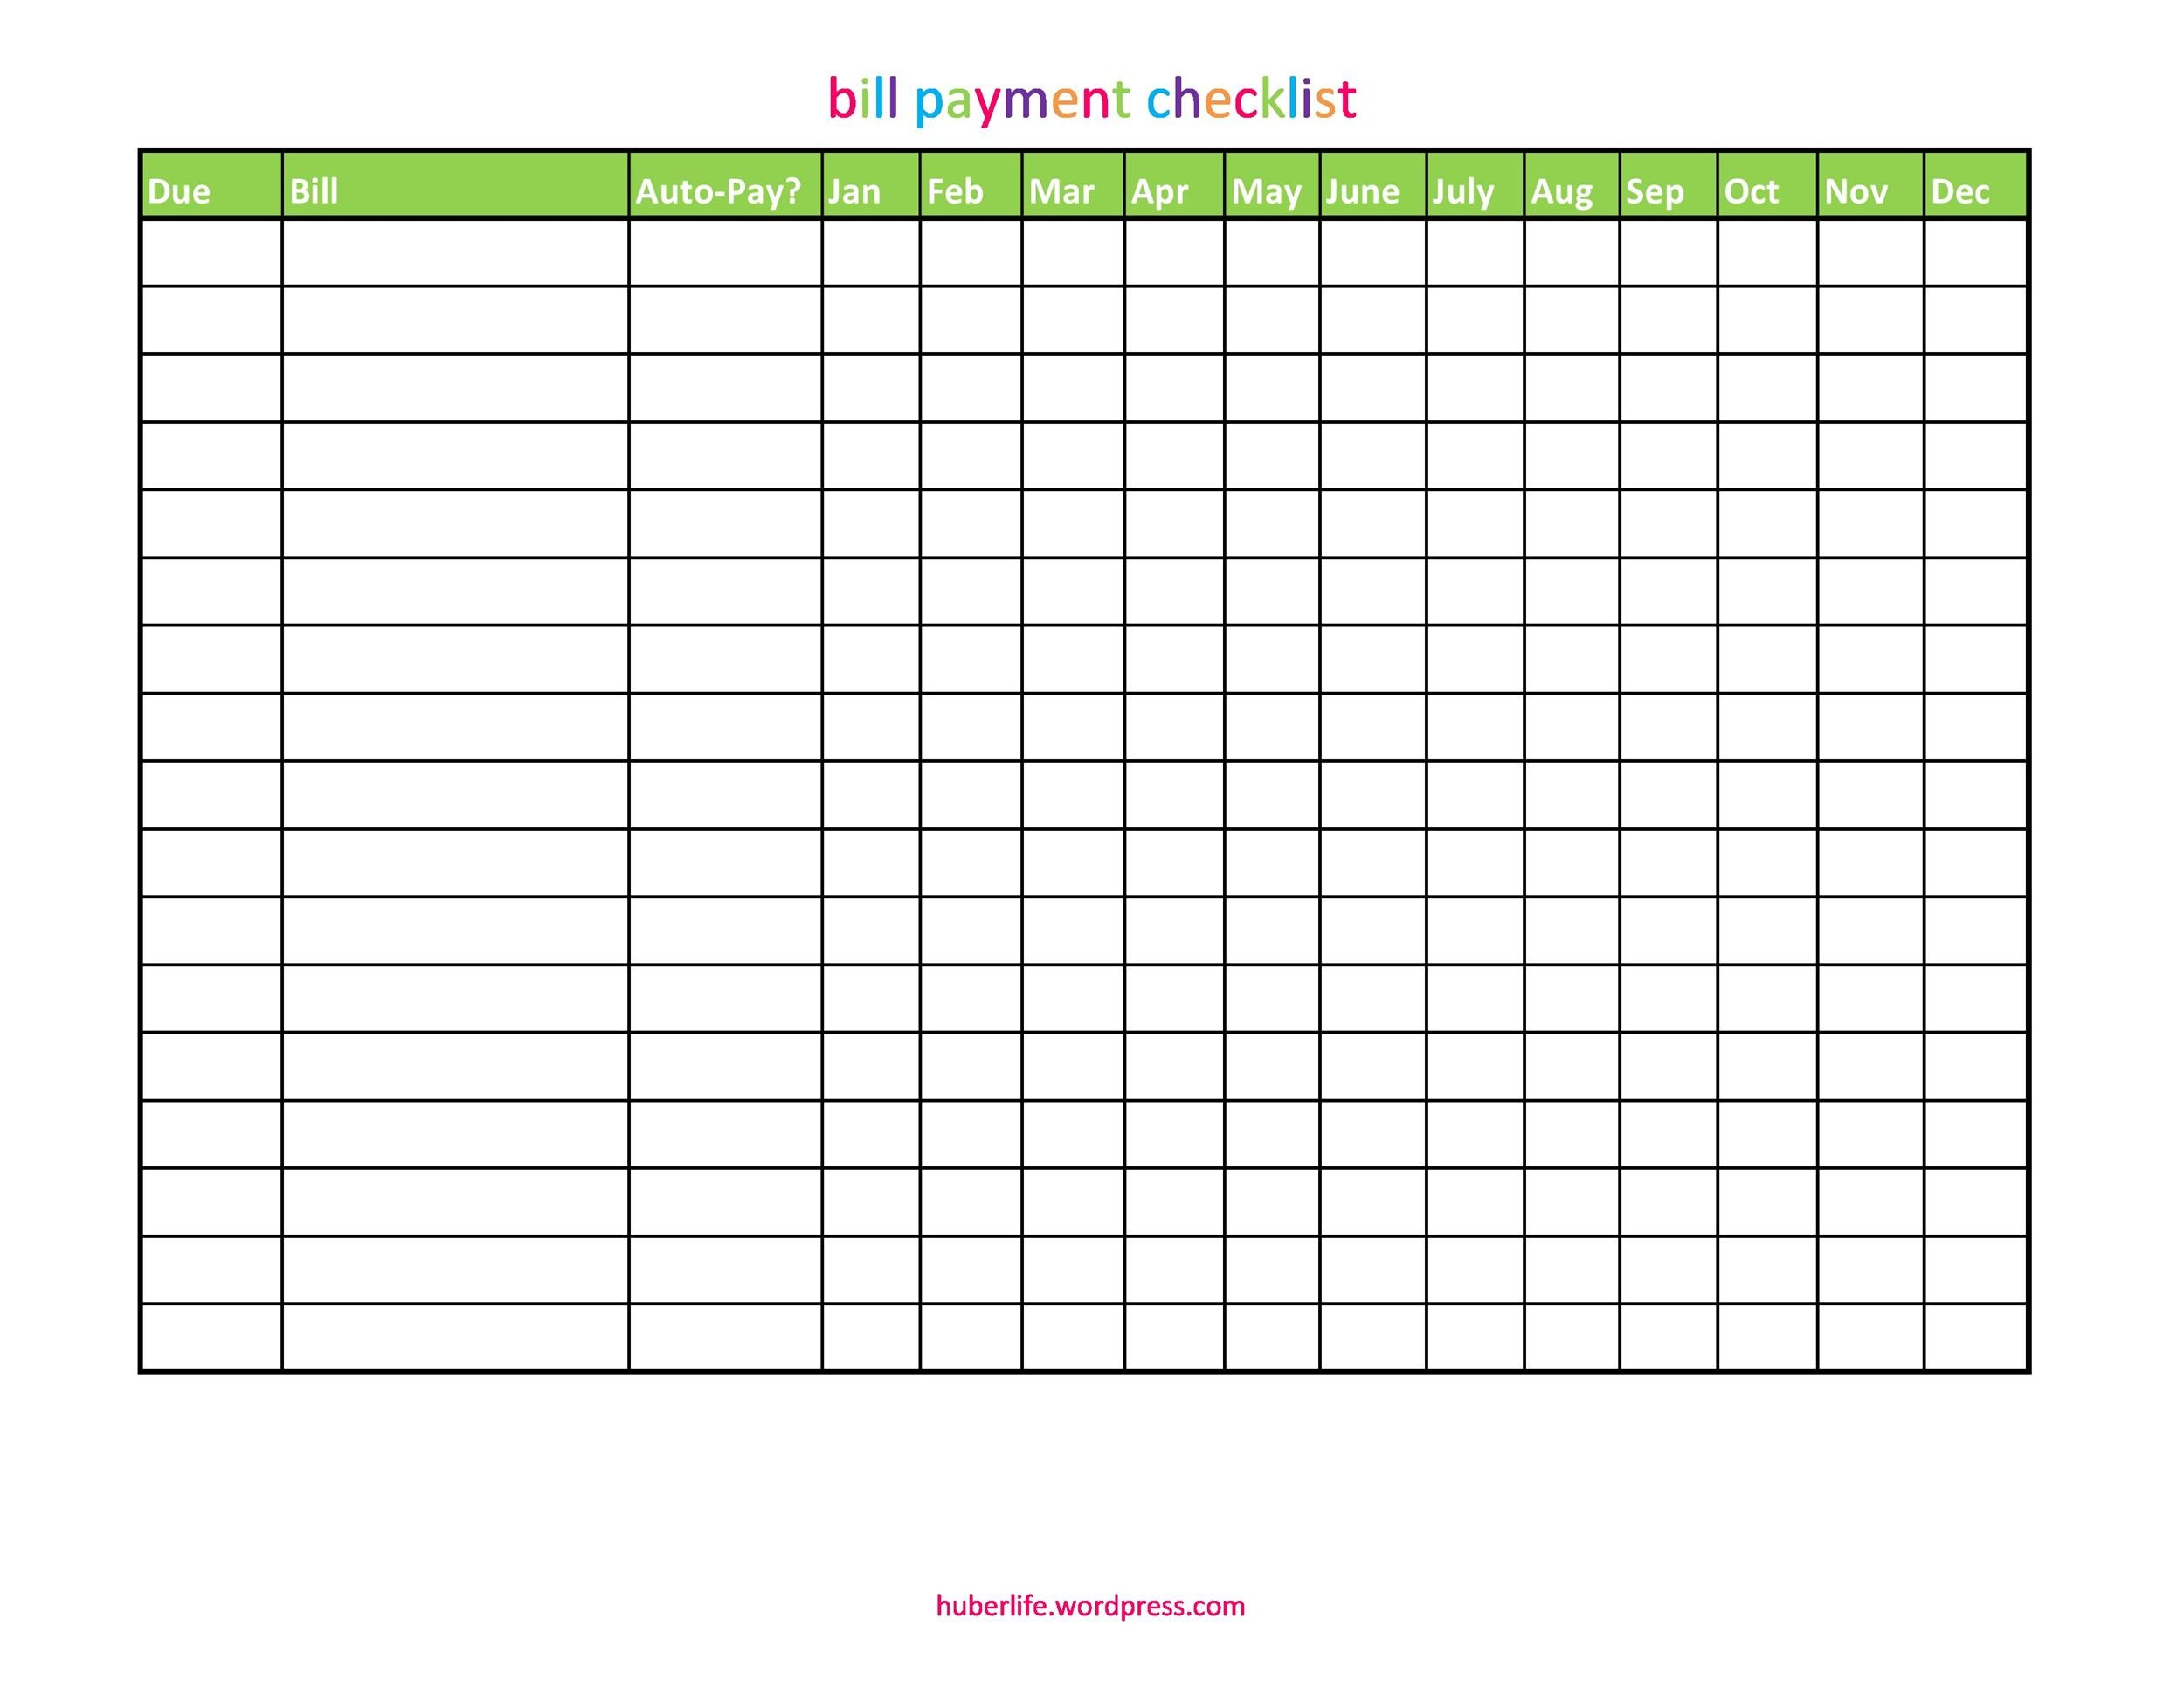 10 Free Bill Pay Checklists & Bill Calendars (PDF, Word & Excel) With Bill Payment Checklist Template